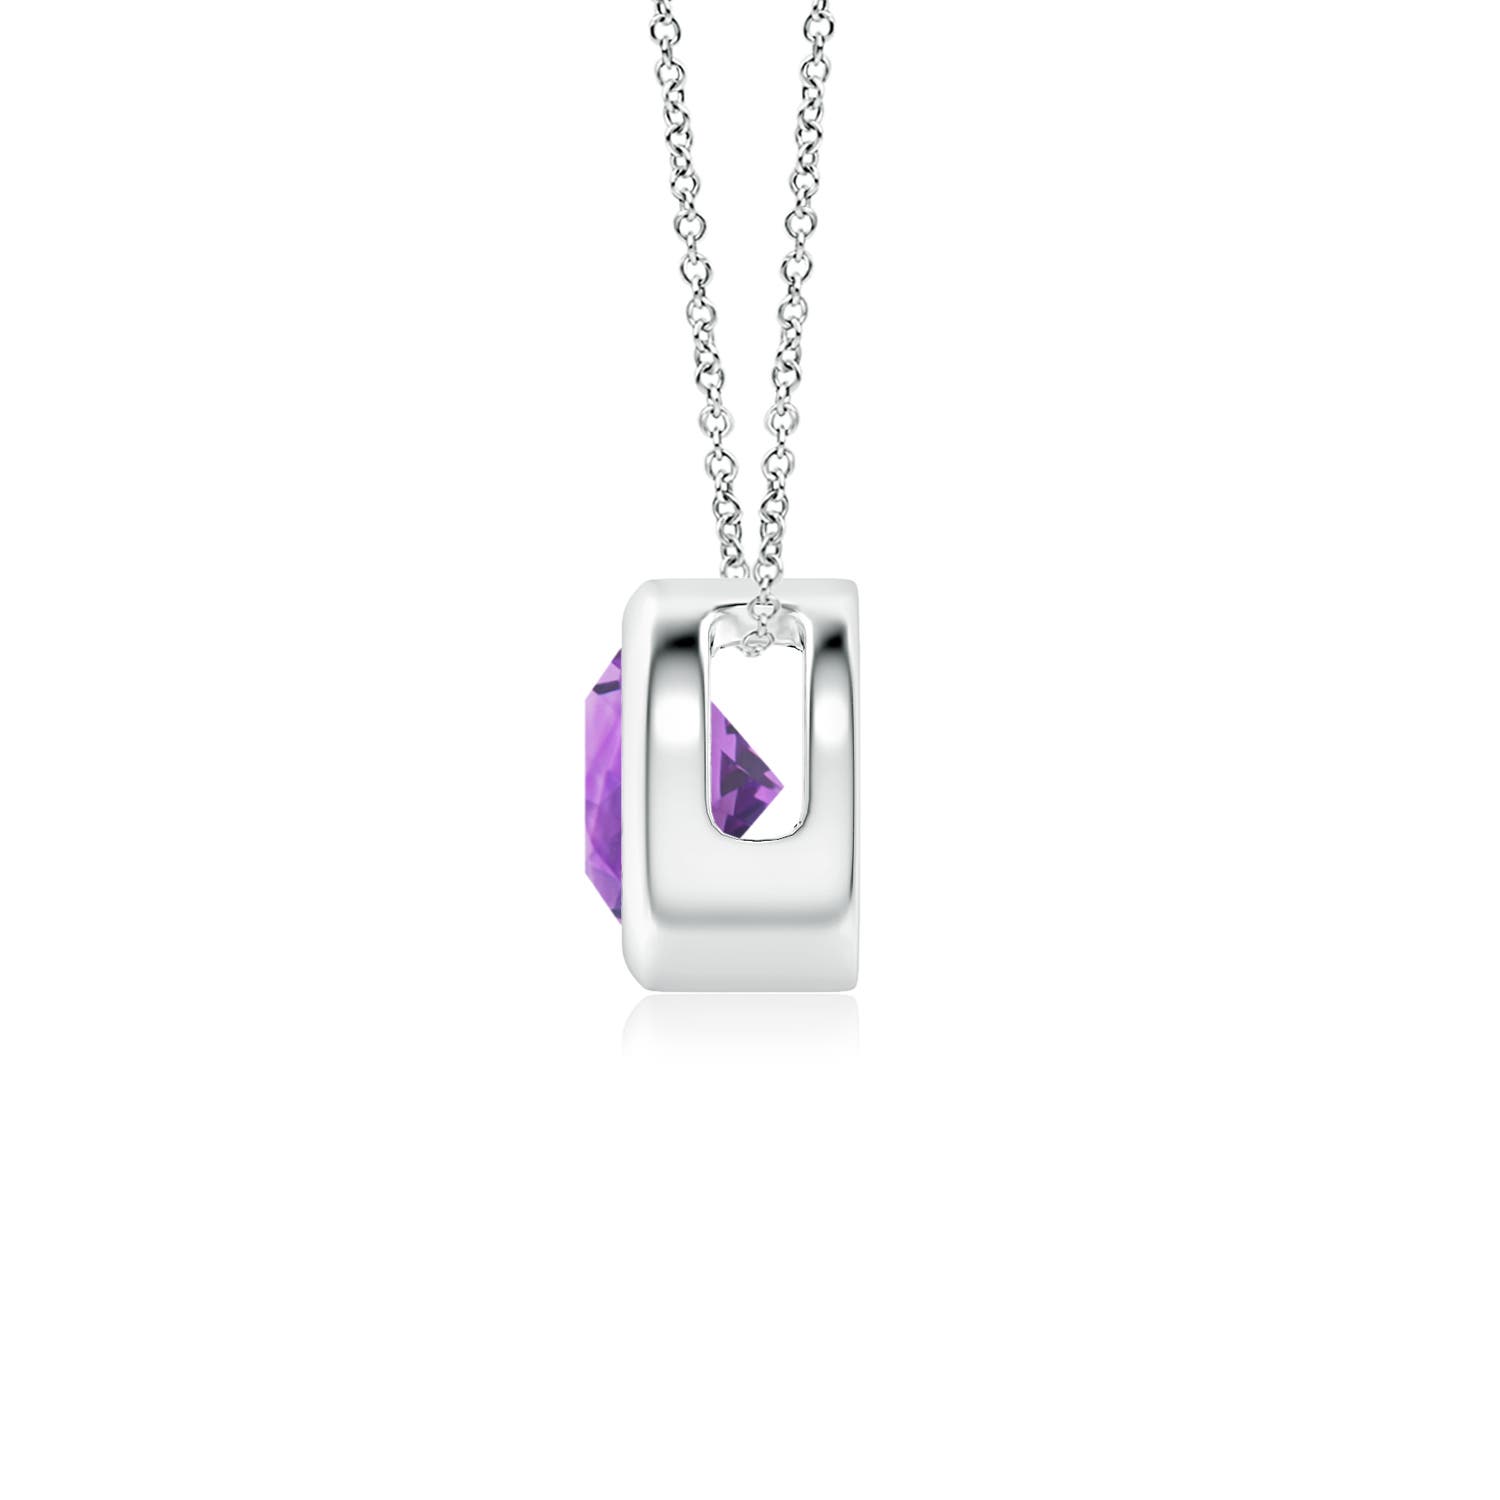 AA - Amethyst / 0.45 CT / 14 KT White Gold